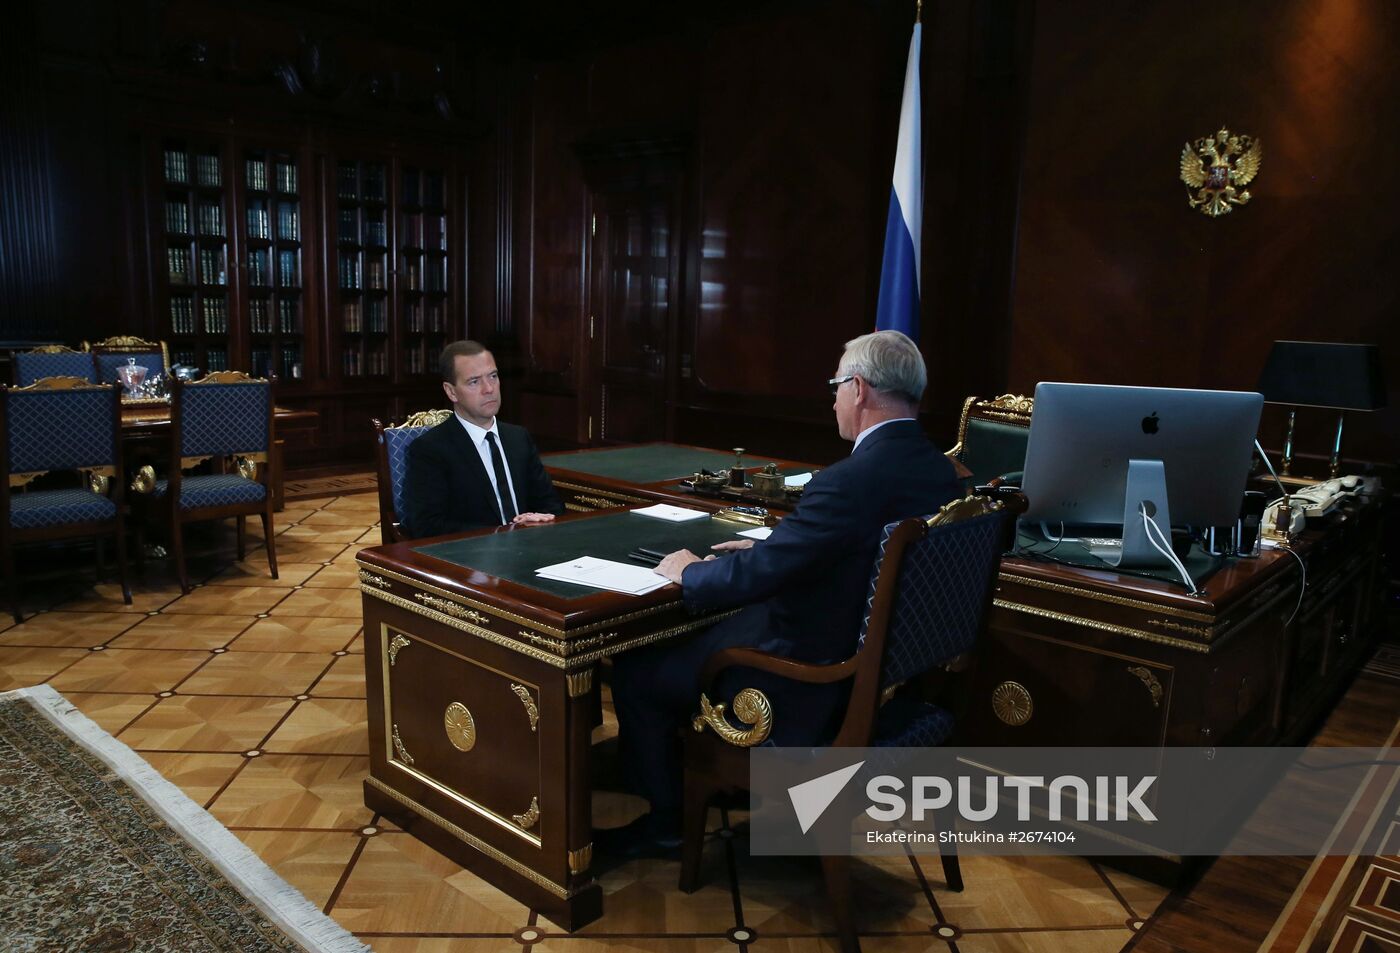 Russian Prime Minister Dmitry Medvedev meets with president of Russian Union of Industrialists and Entrepreneurs Alexander Shokhin